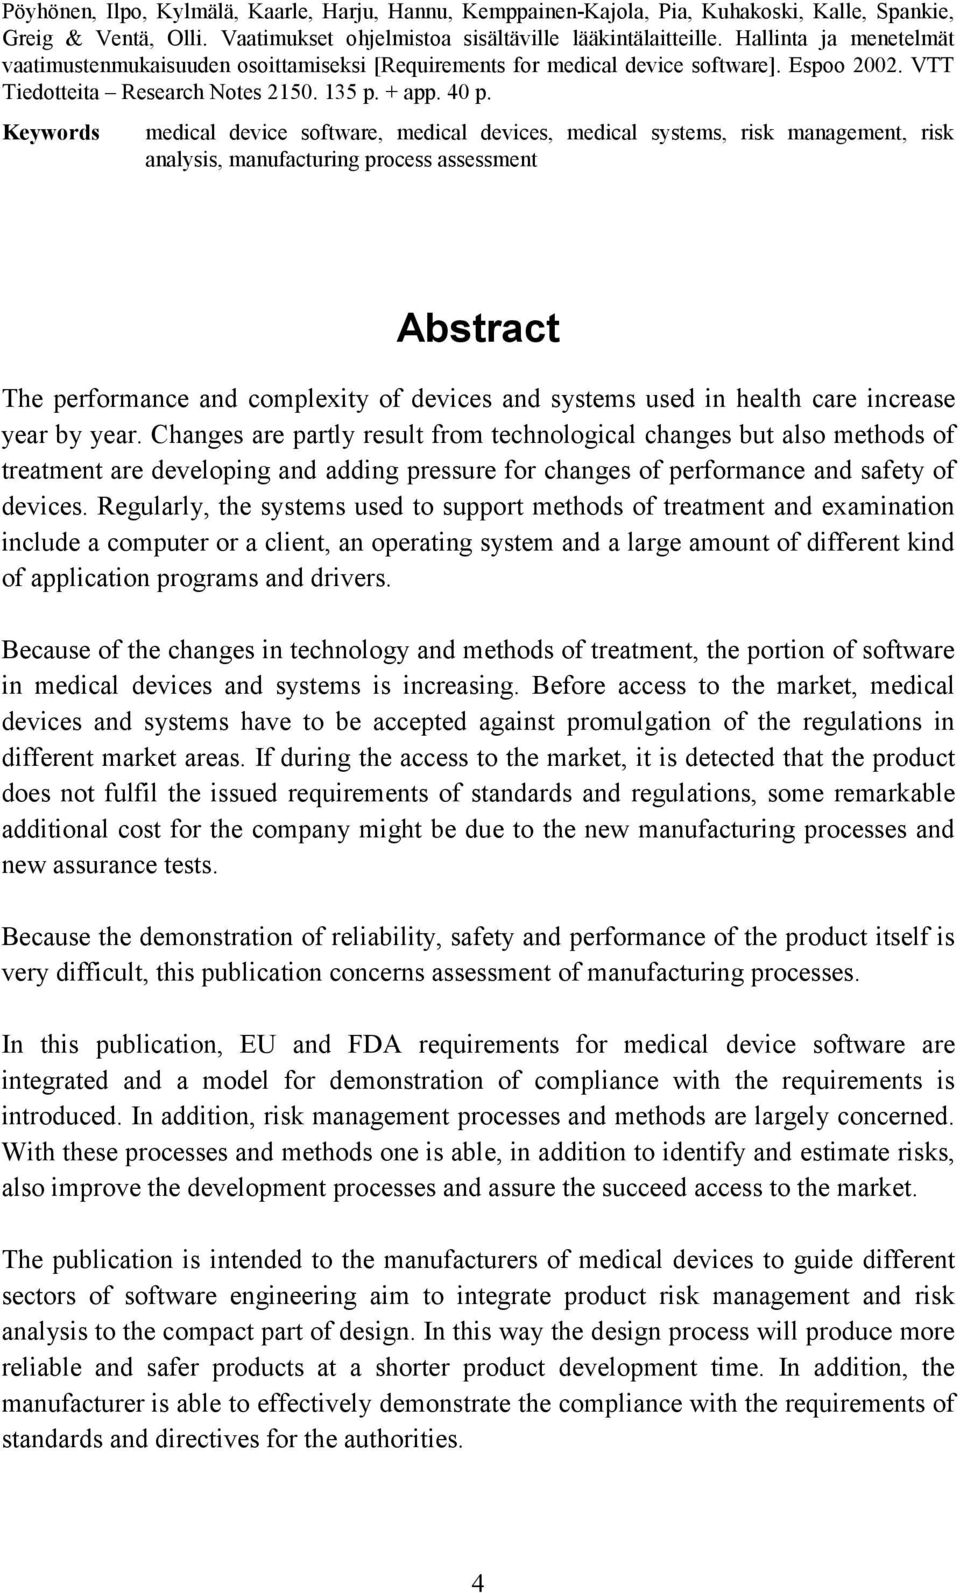 Keywords medical device software, medical devices, medical systems, risk management, risk analysis, manufacturing process assessment Abstract The performance and complexity of devices and systems